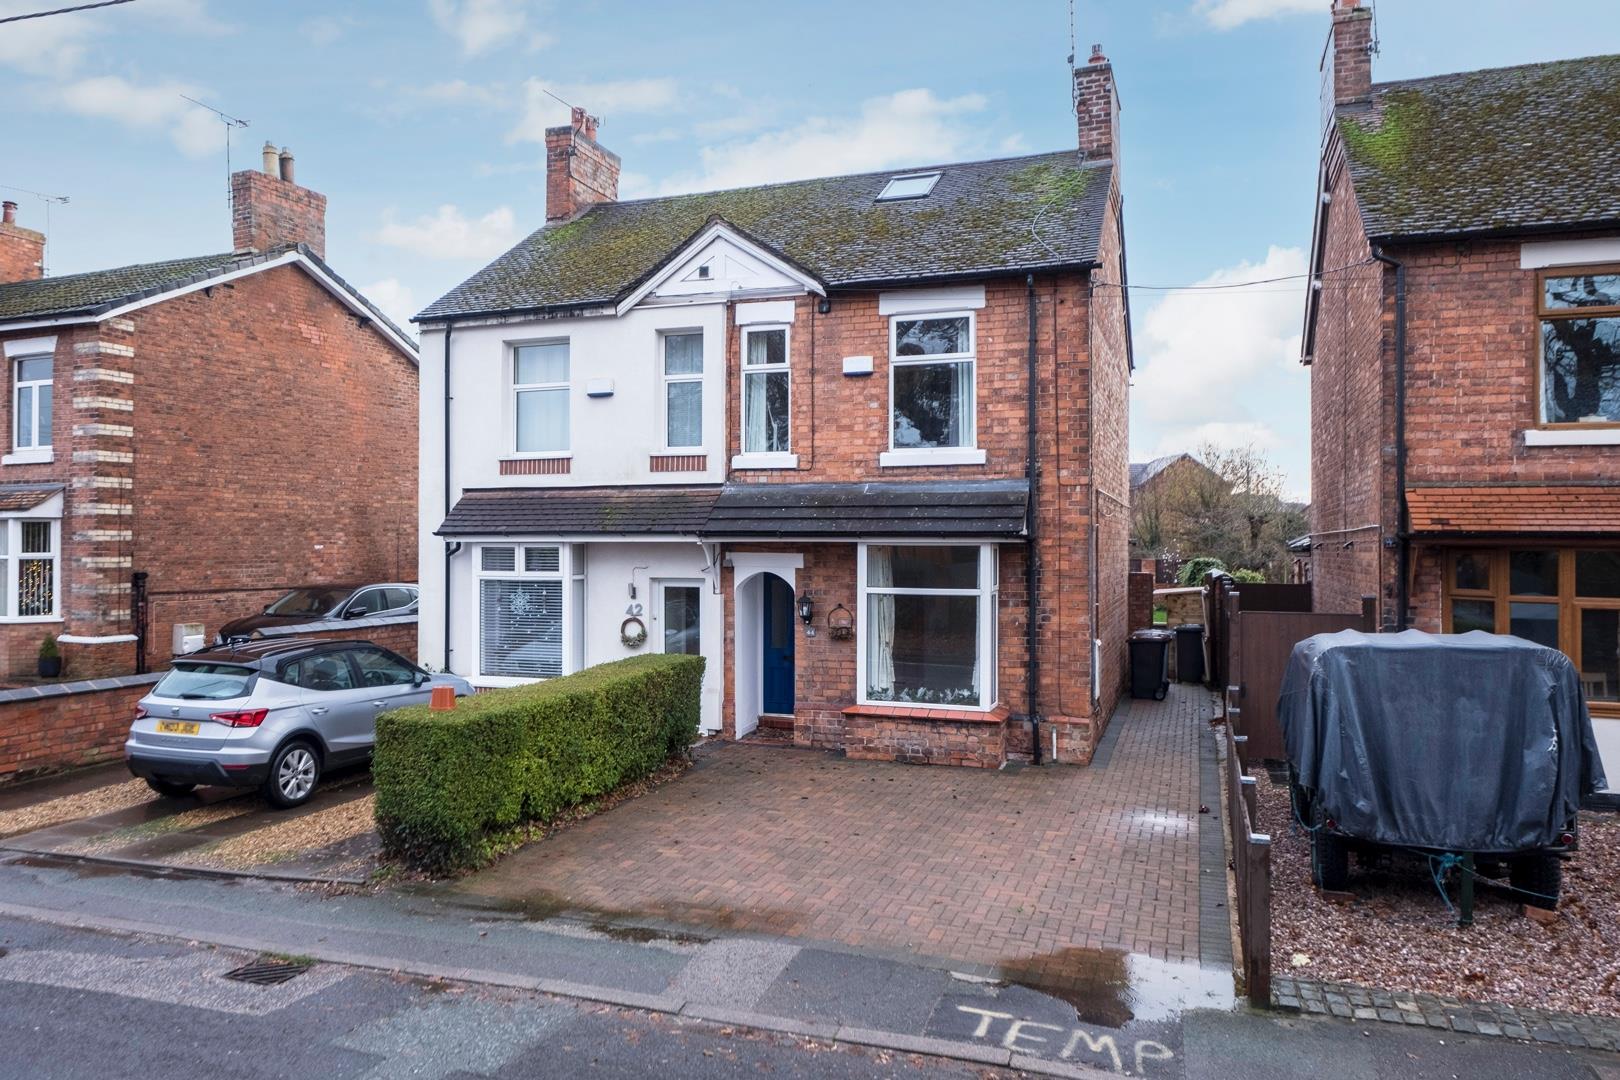 2 bedroom  Semi Detached House for Sale in Willaston